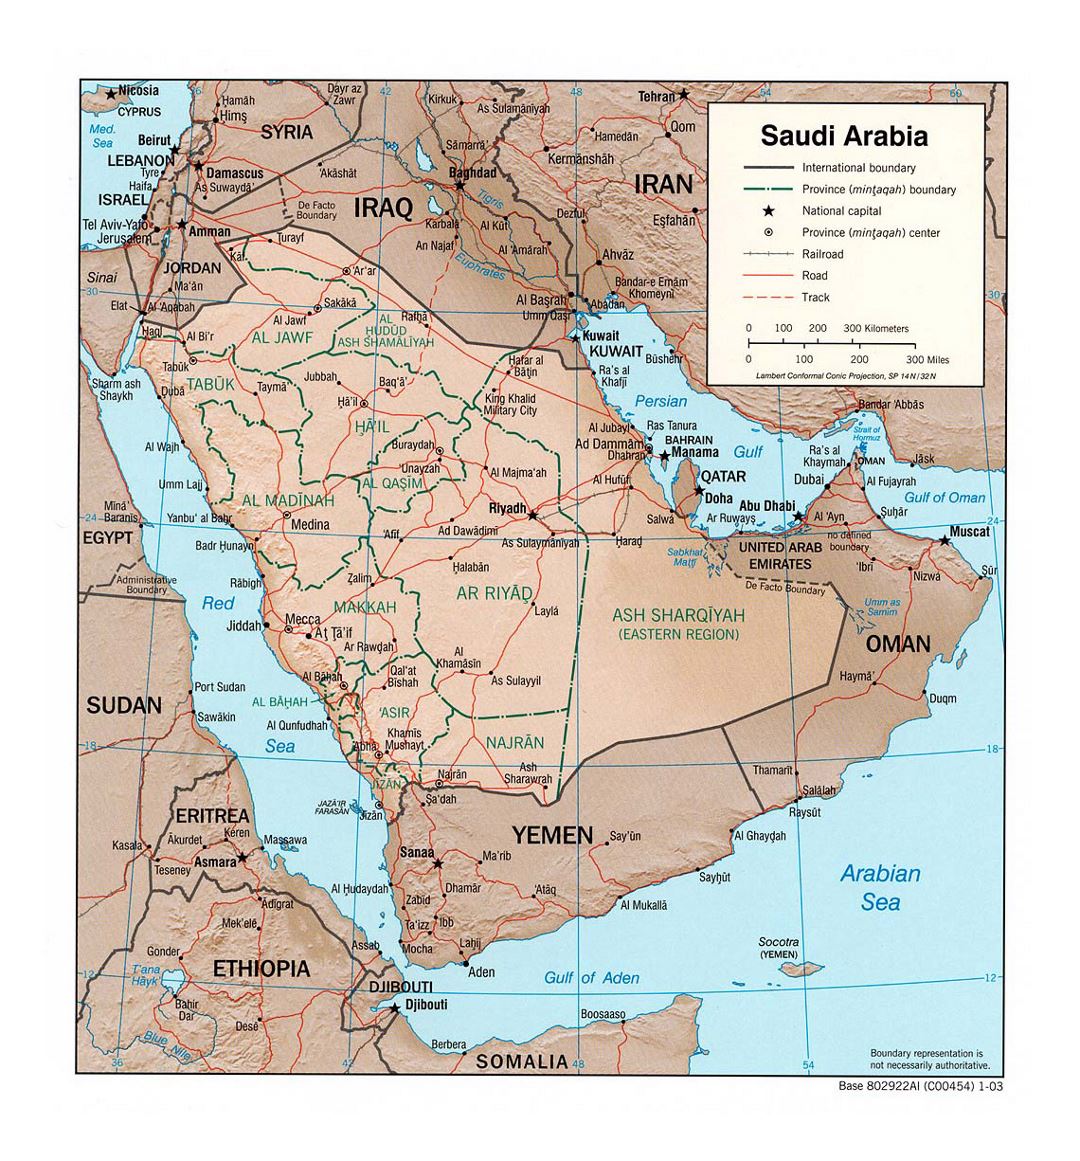 Detailed political and administrative map of Saudi Arabia with relief, roads, railroads and major cities - 2003